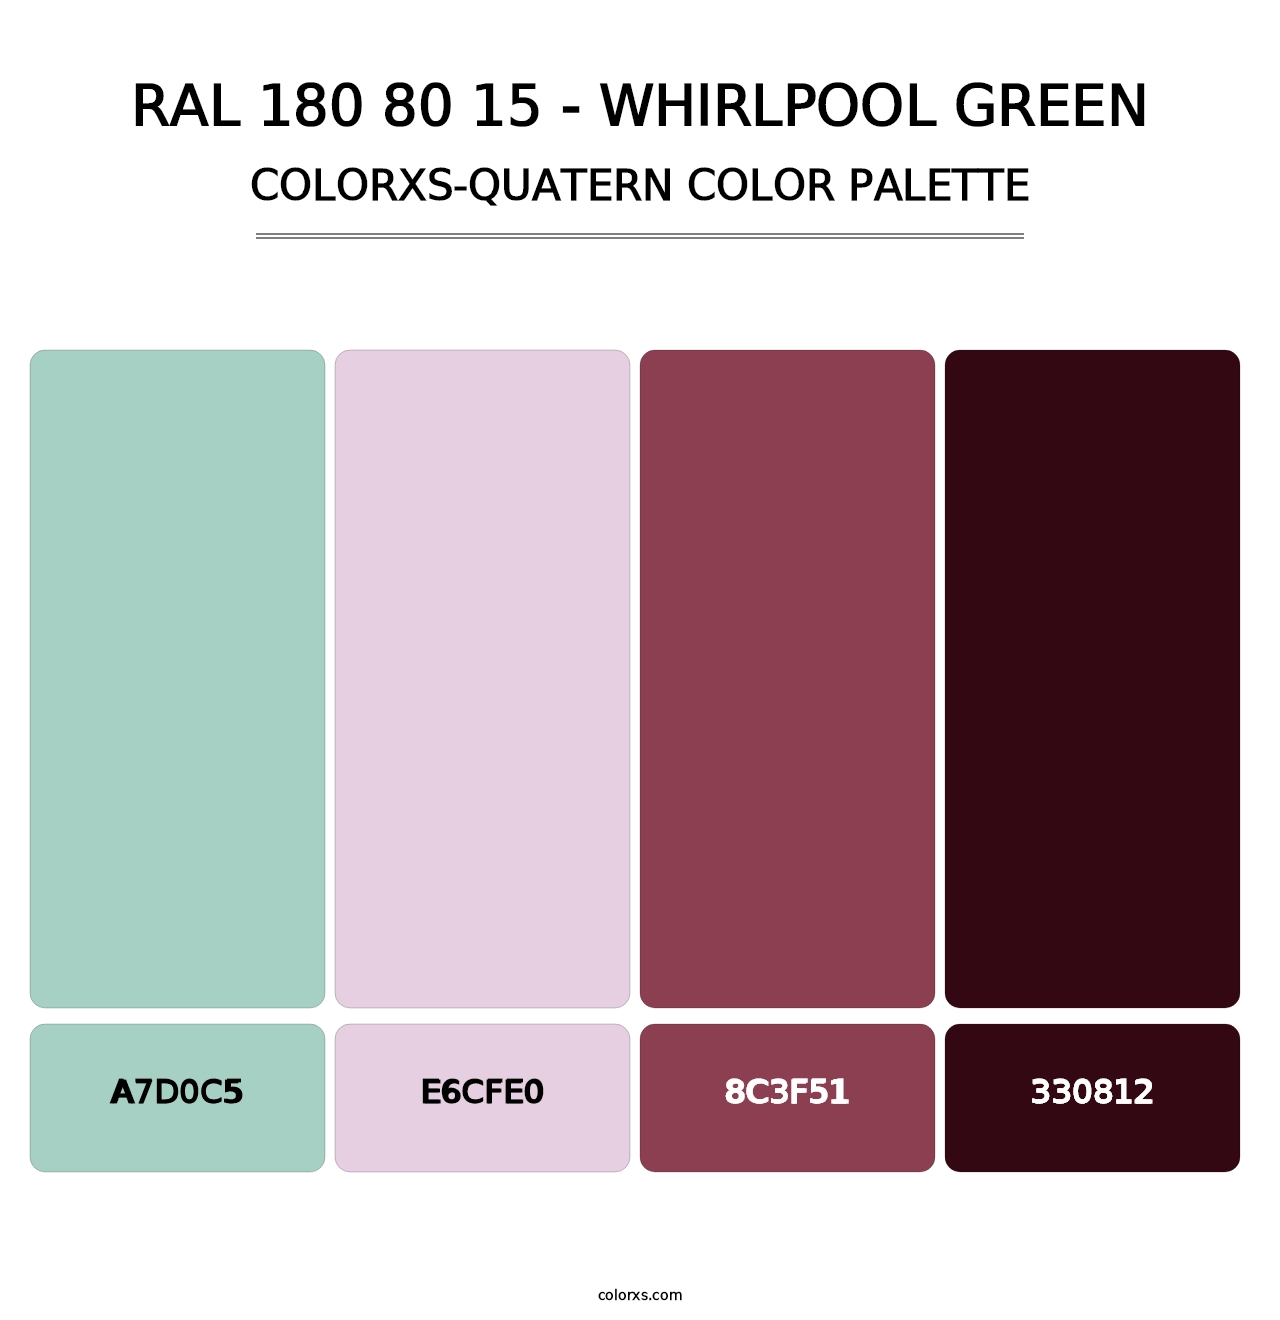 RAL 180 80 15 - Whirlpool Green - Colorxs Quatern Palette